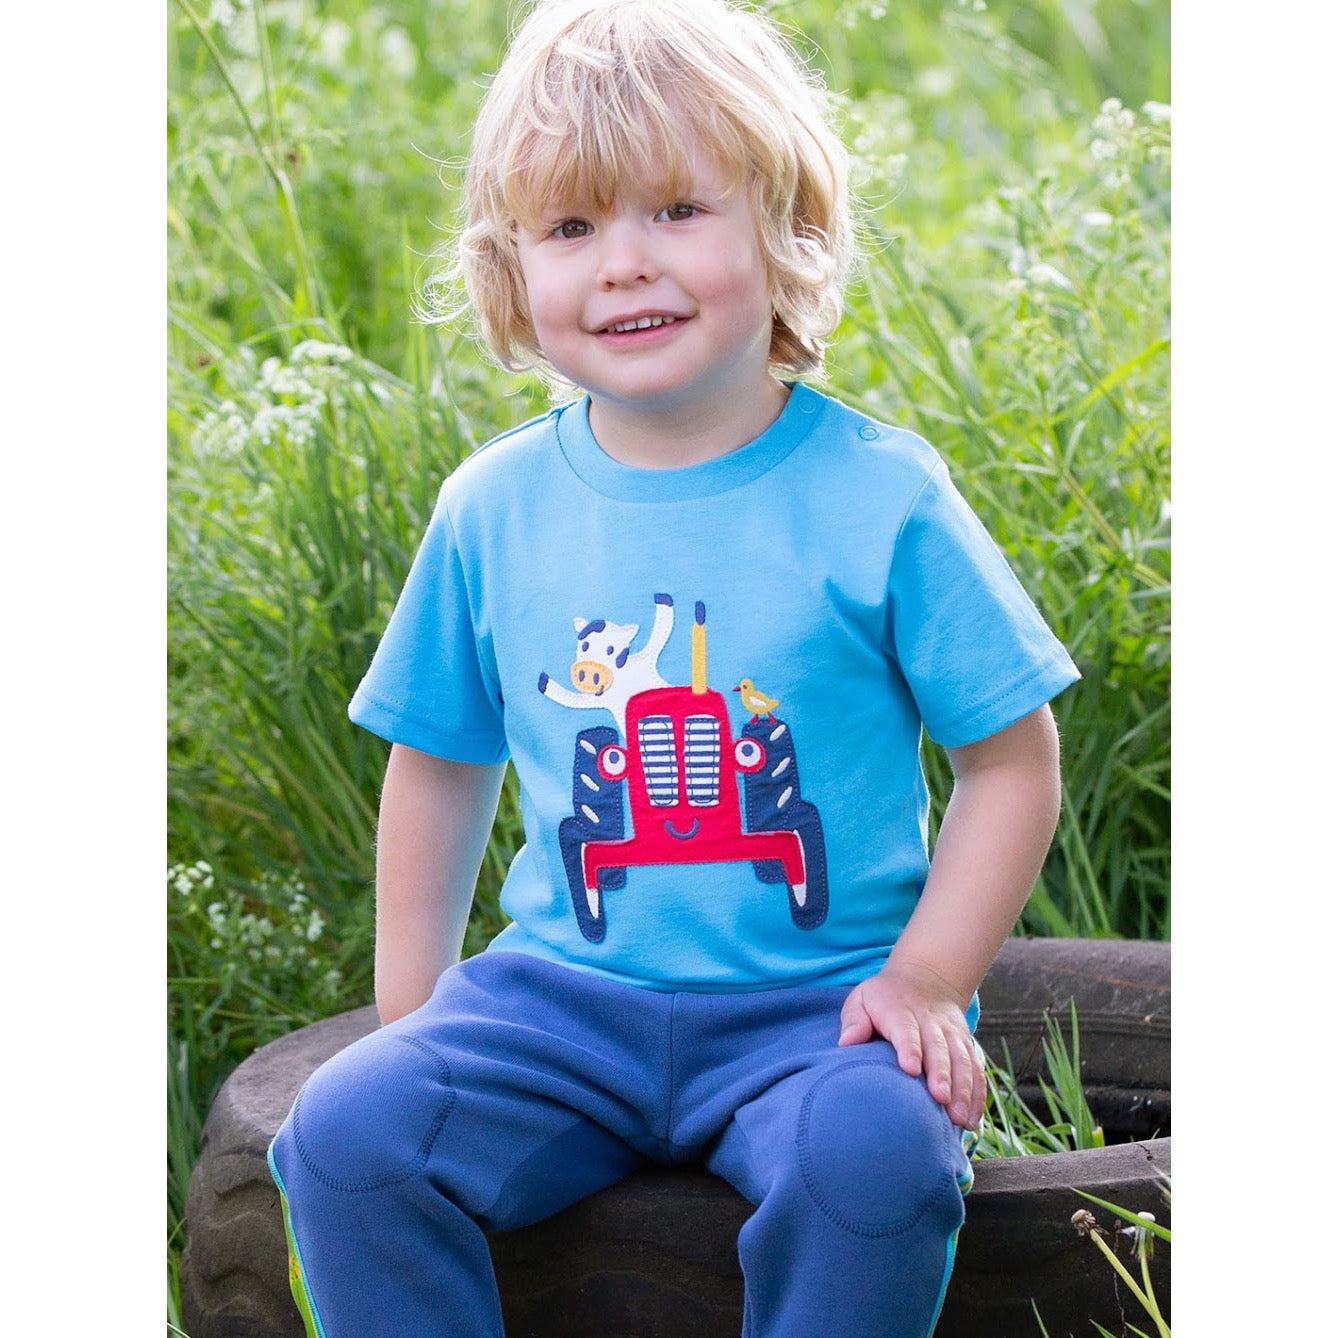 Kite Infant Tractor T-Shirt 9468 Clothing 3-6M / Blue,6-9M / Blue,9-12M / Blue,12-18M / Blue,18-24M/2Y / Blue,3YRS / Blue,4YRS / Blue,5YRS / Blue